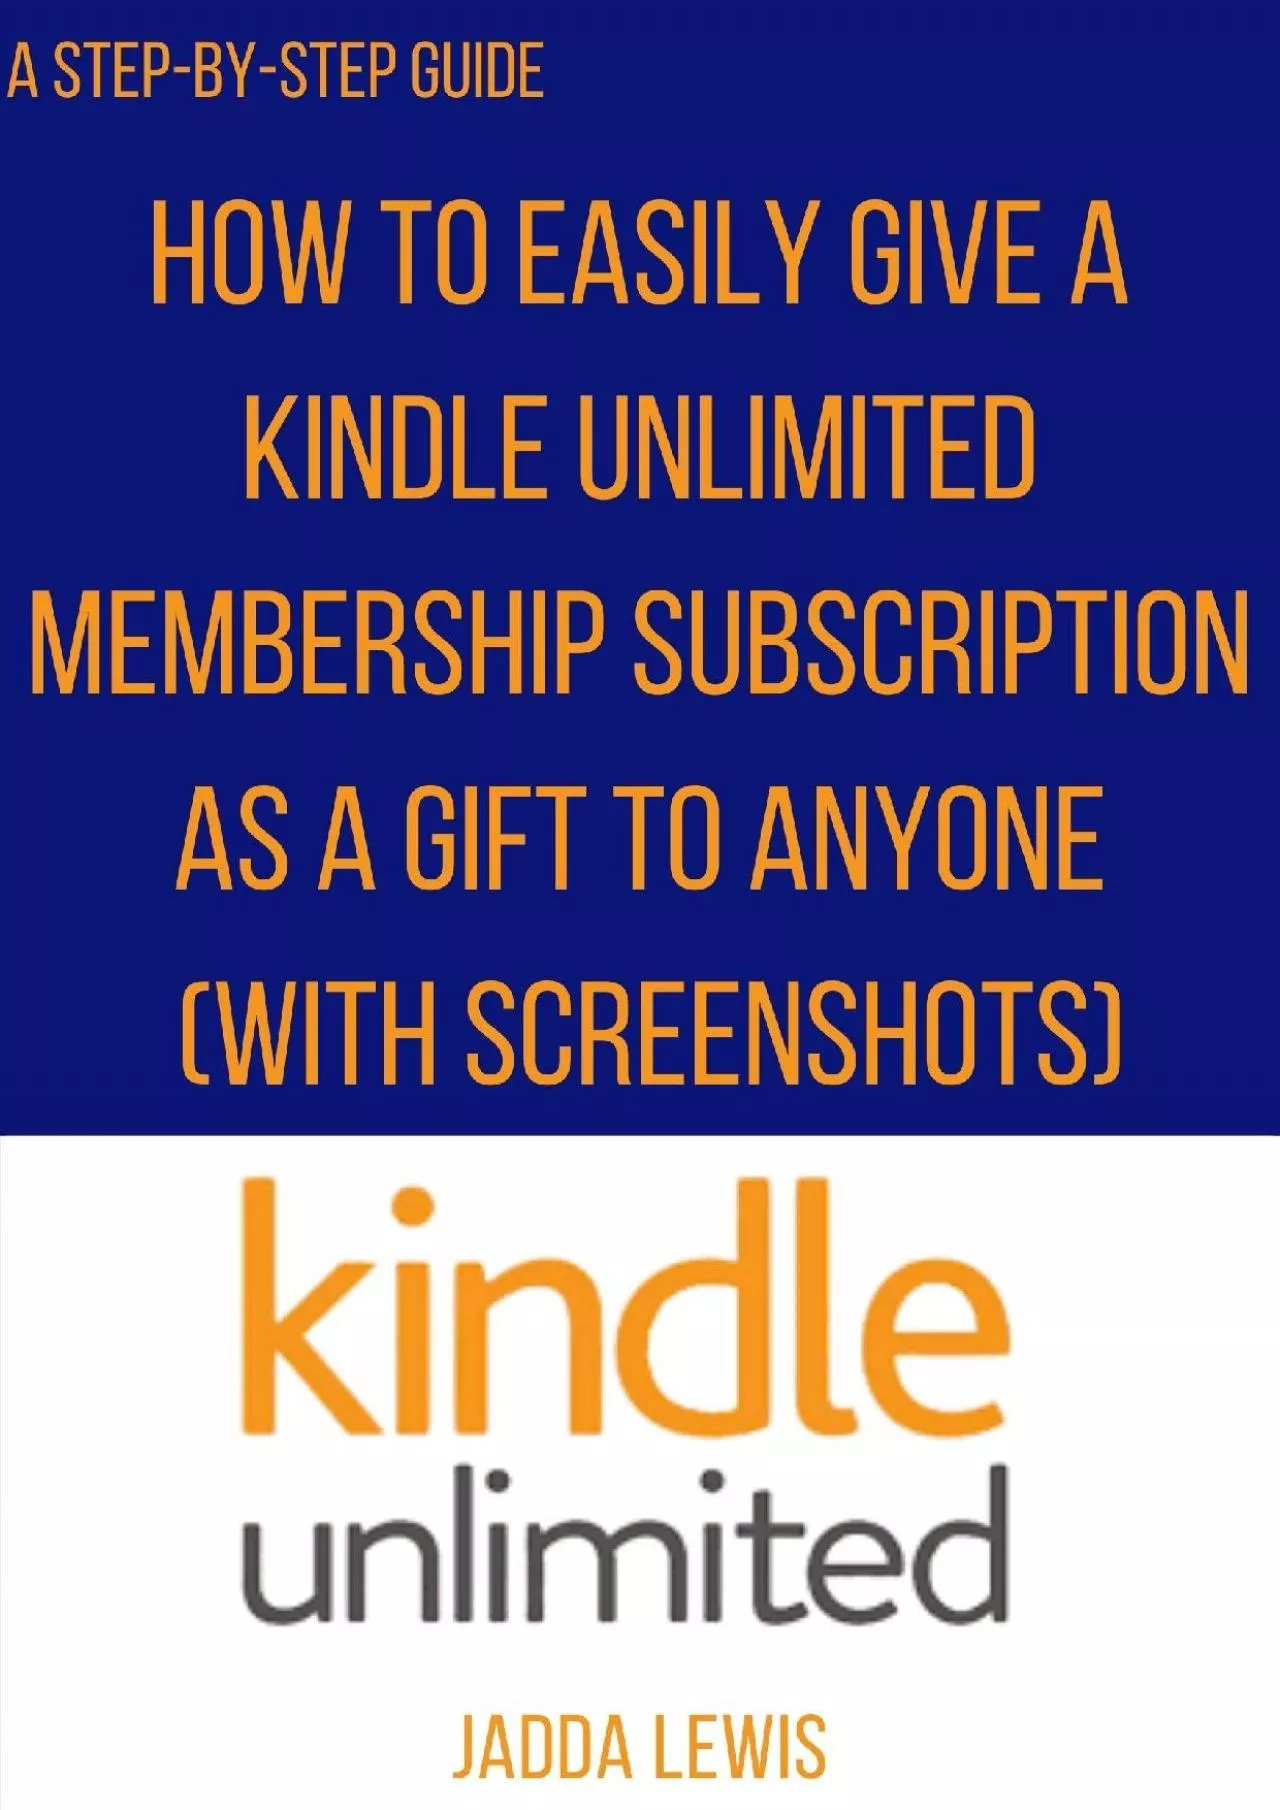 [DOWLOAD]-How To Gift Kindle Unlimited Membership Subscription: The Step-By-Step Guide